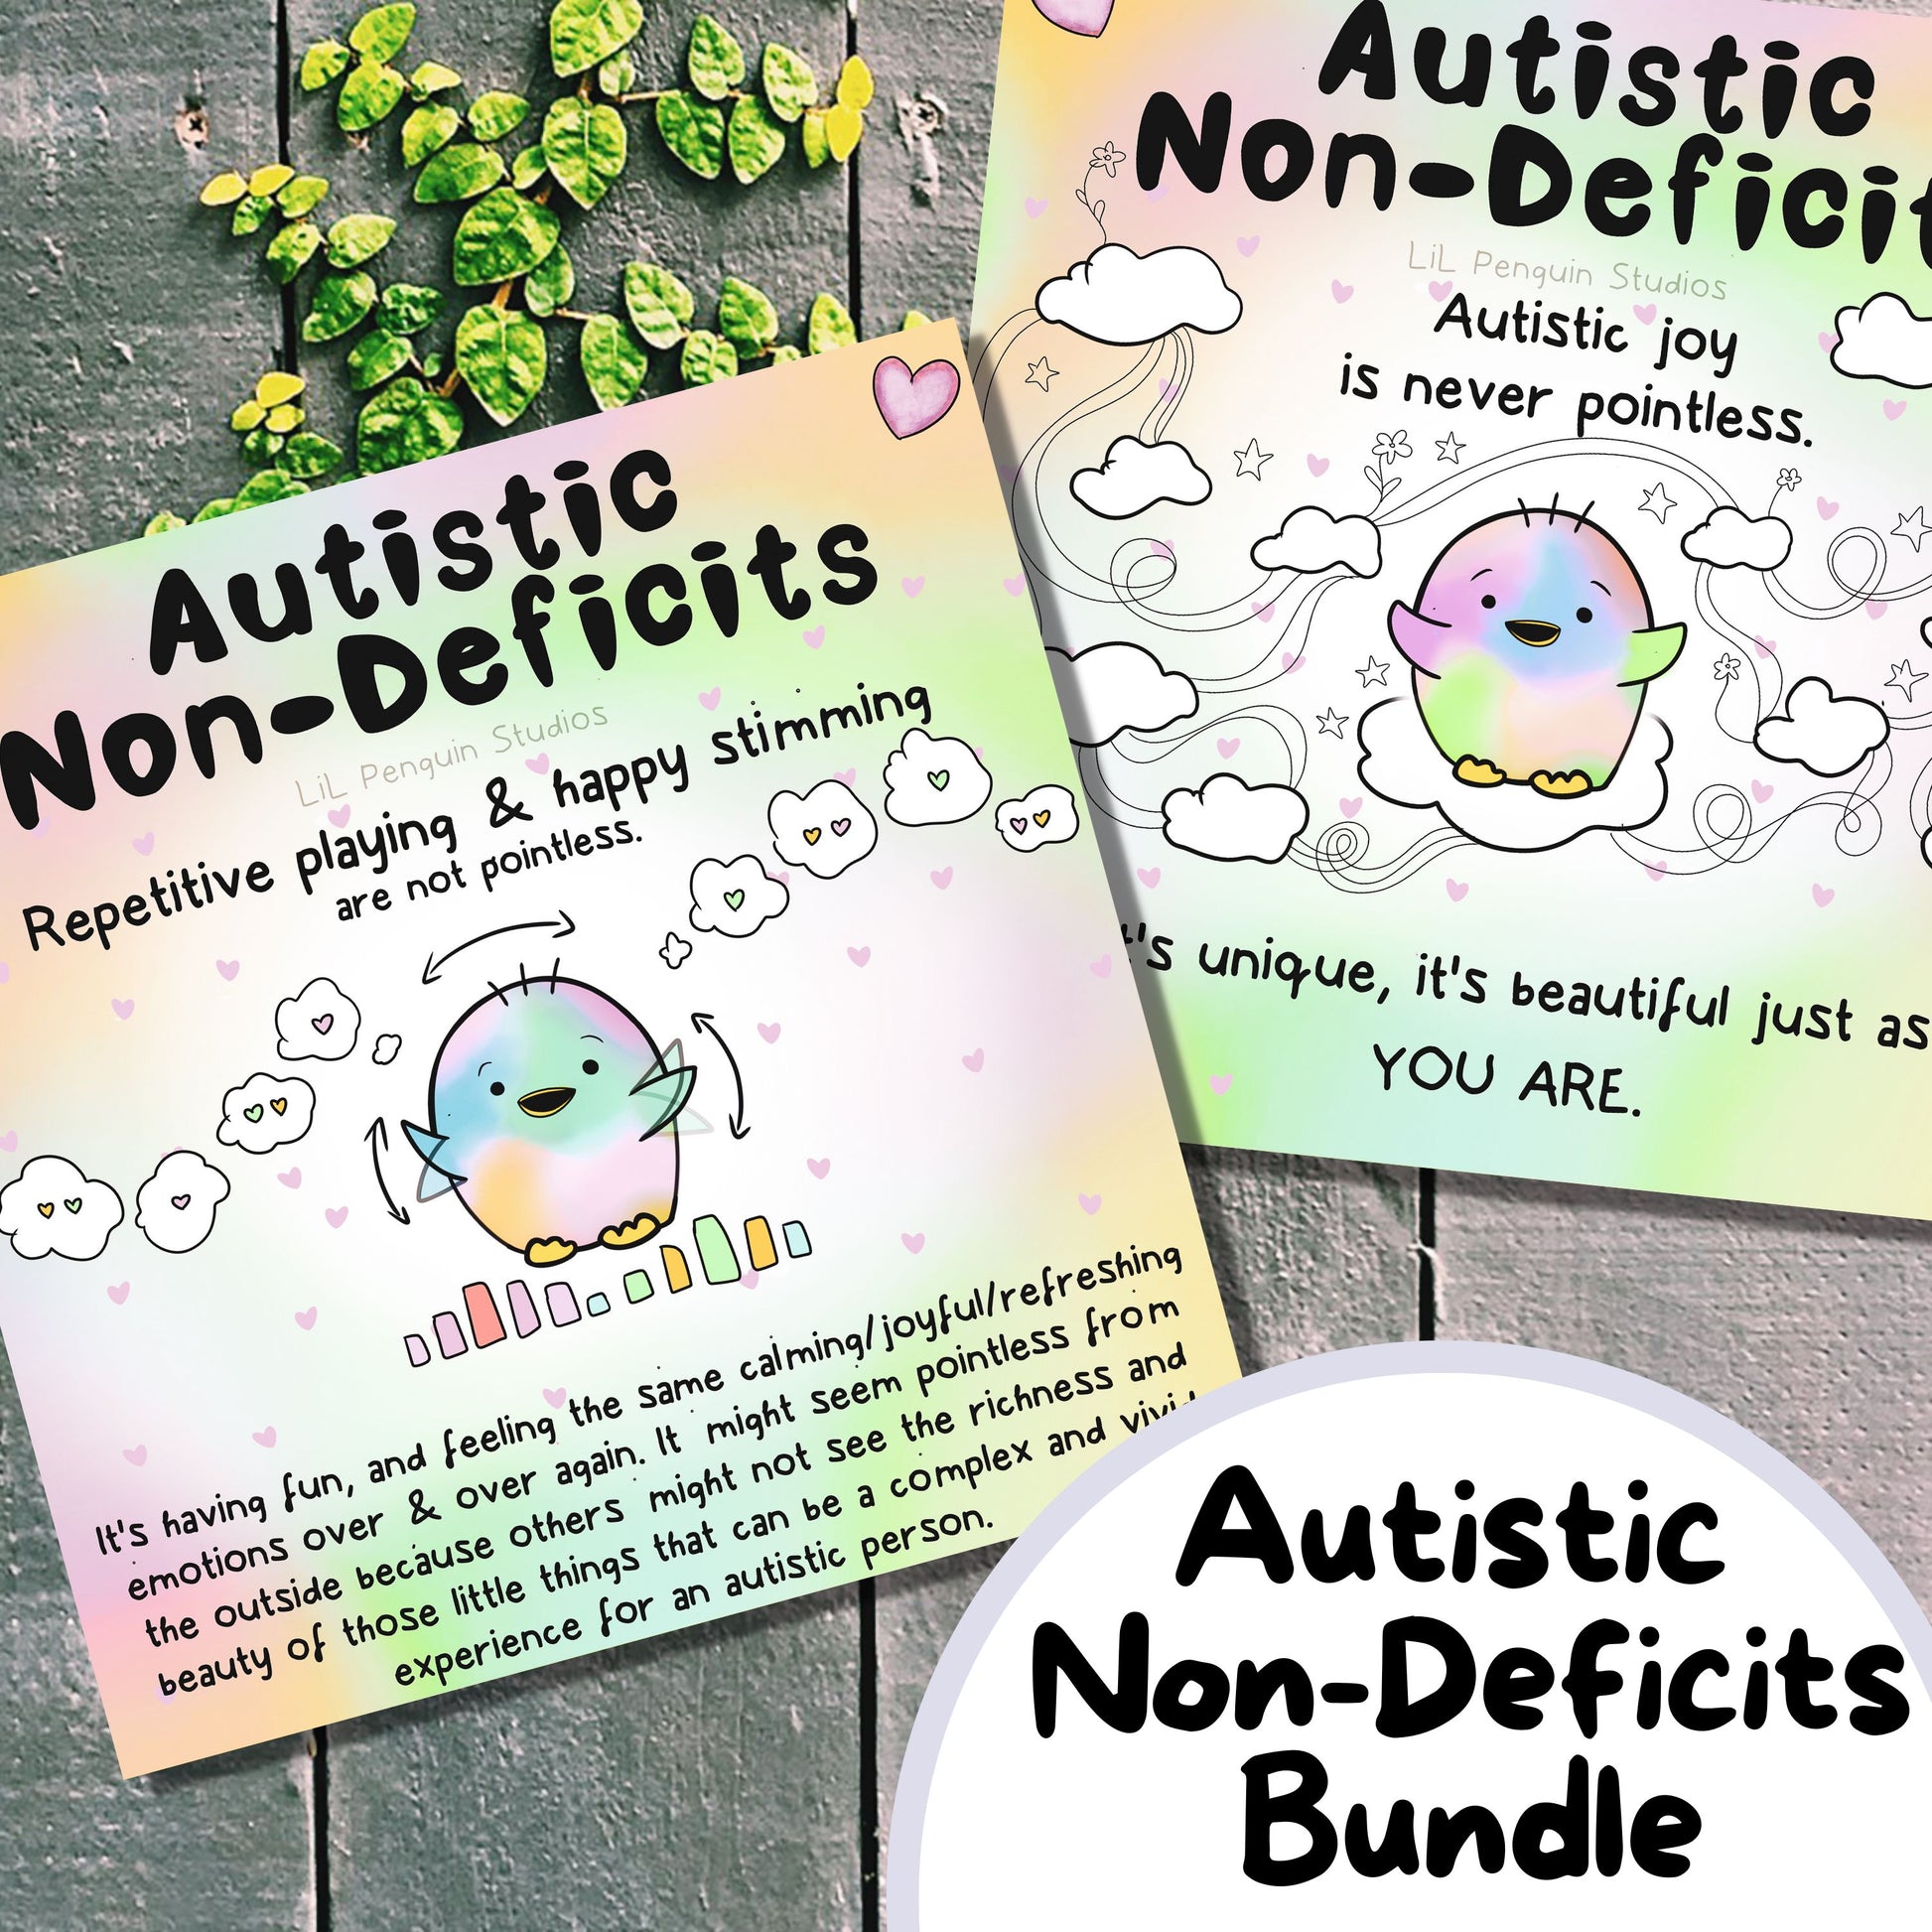 Autistic Non-Deficits Printable Bundle (there are two artworks shown about repetitive playing, happy stimming and autistic joy)